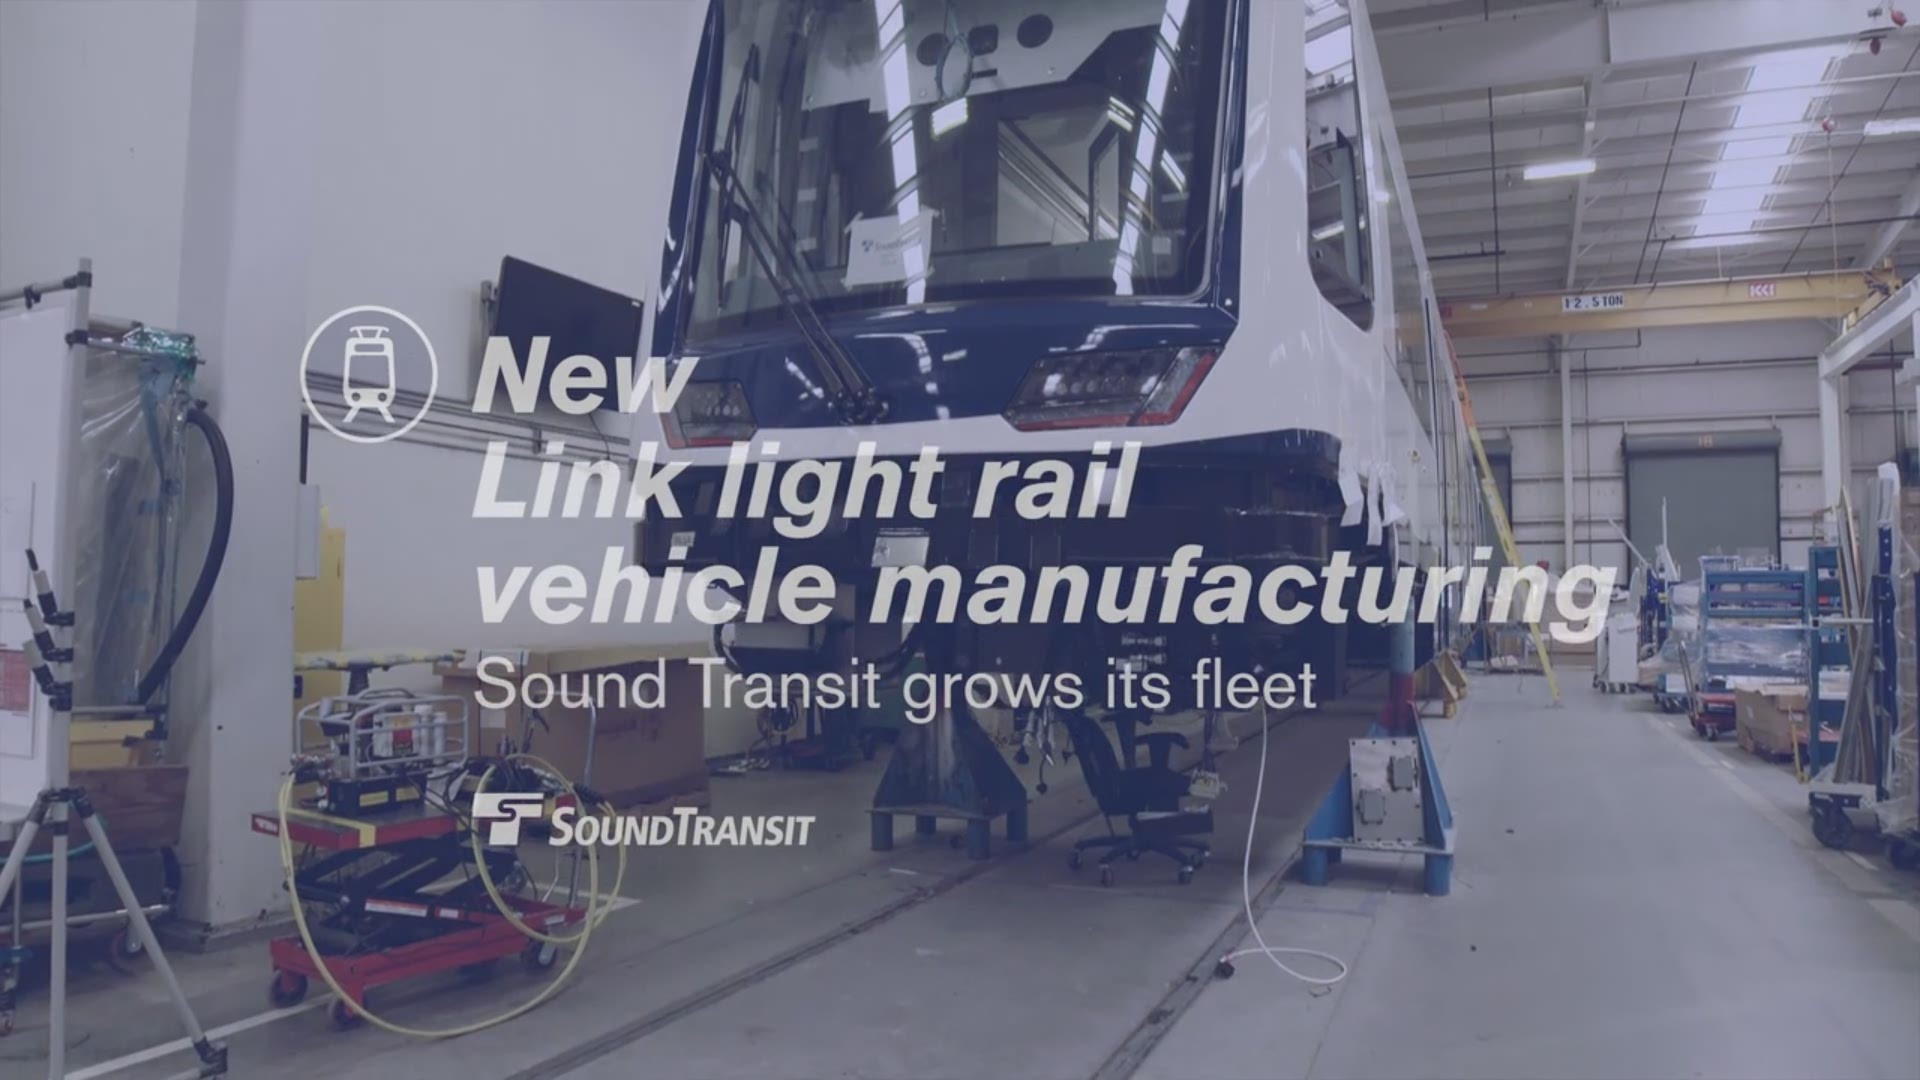 The new light rail vehicles have been unveiled. Video provided by Sound Transit